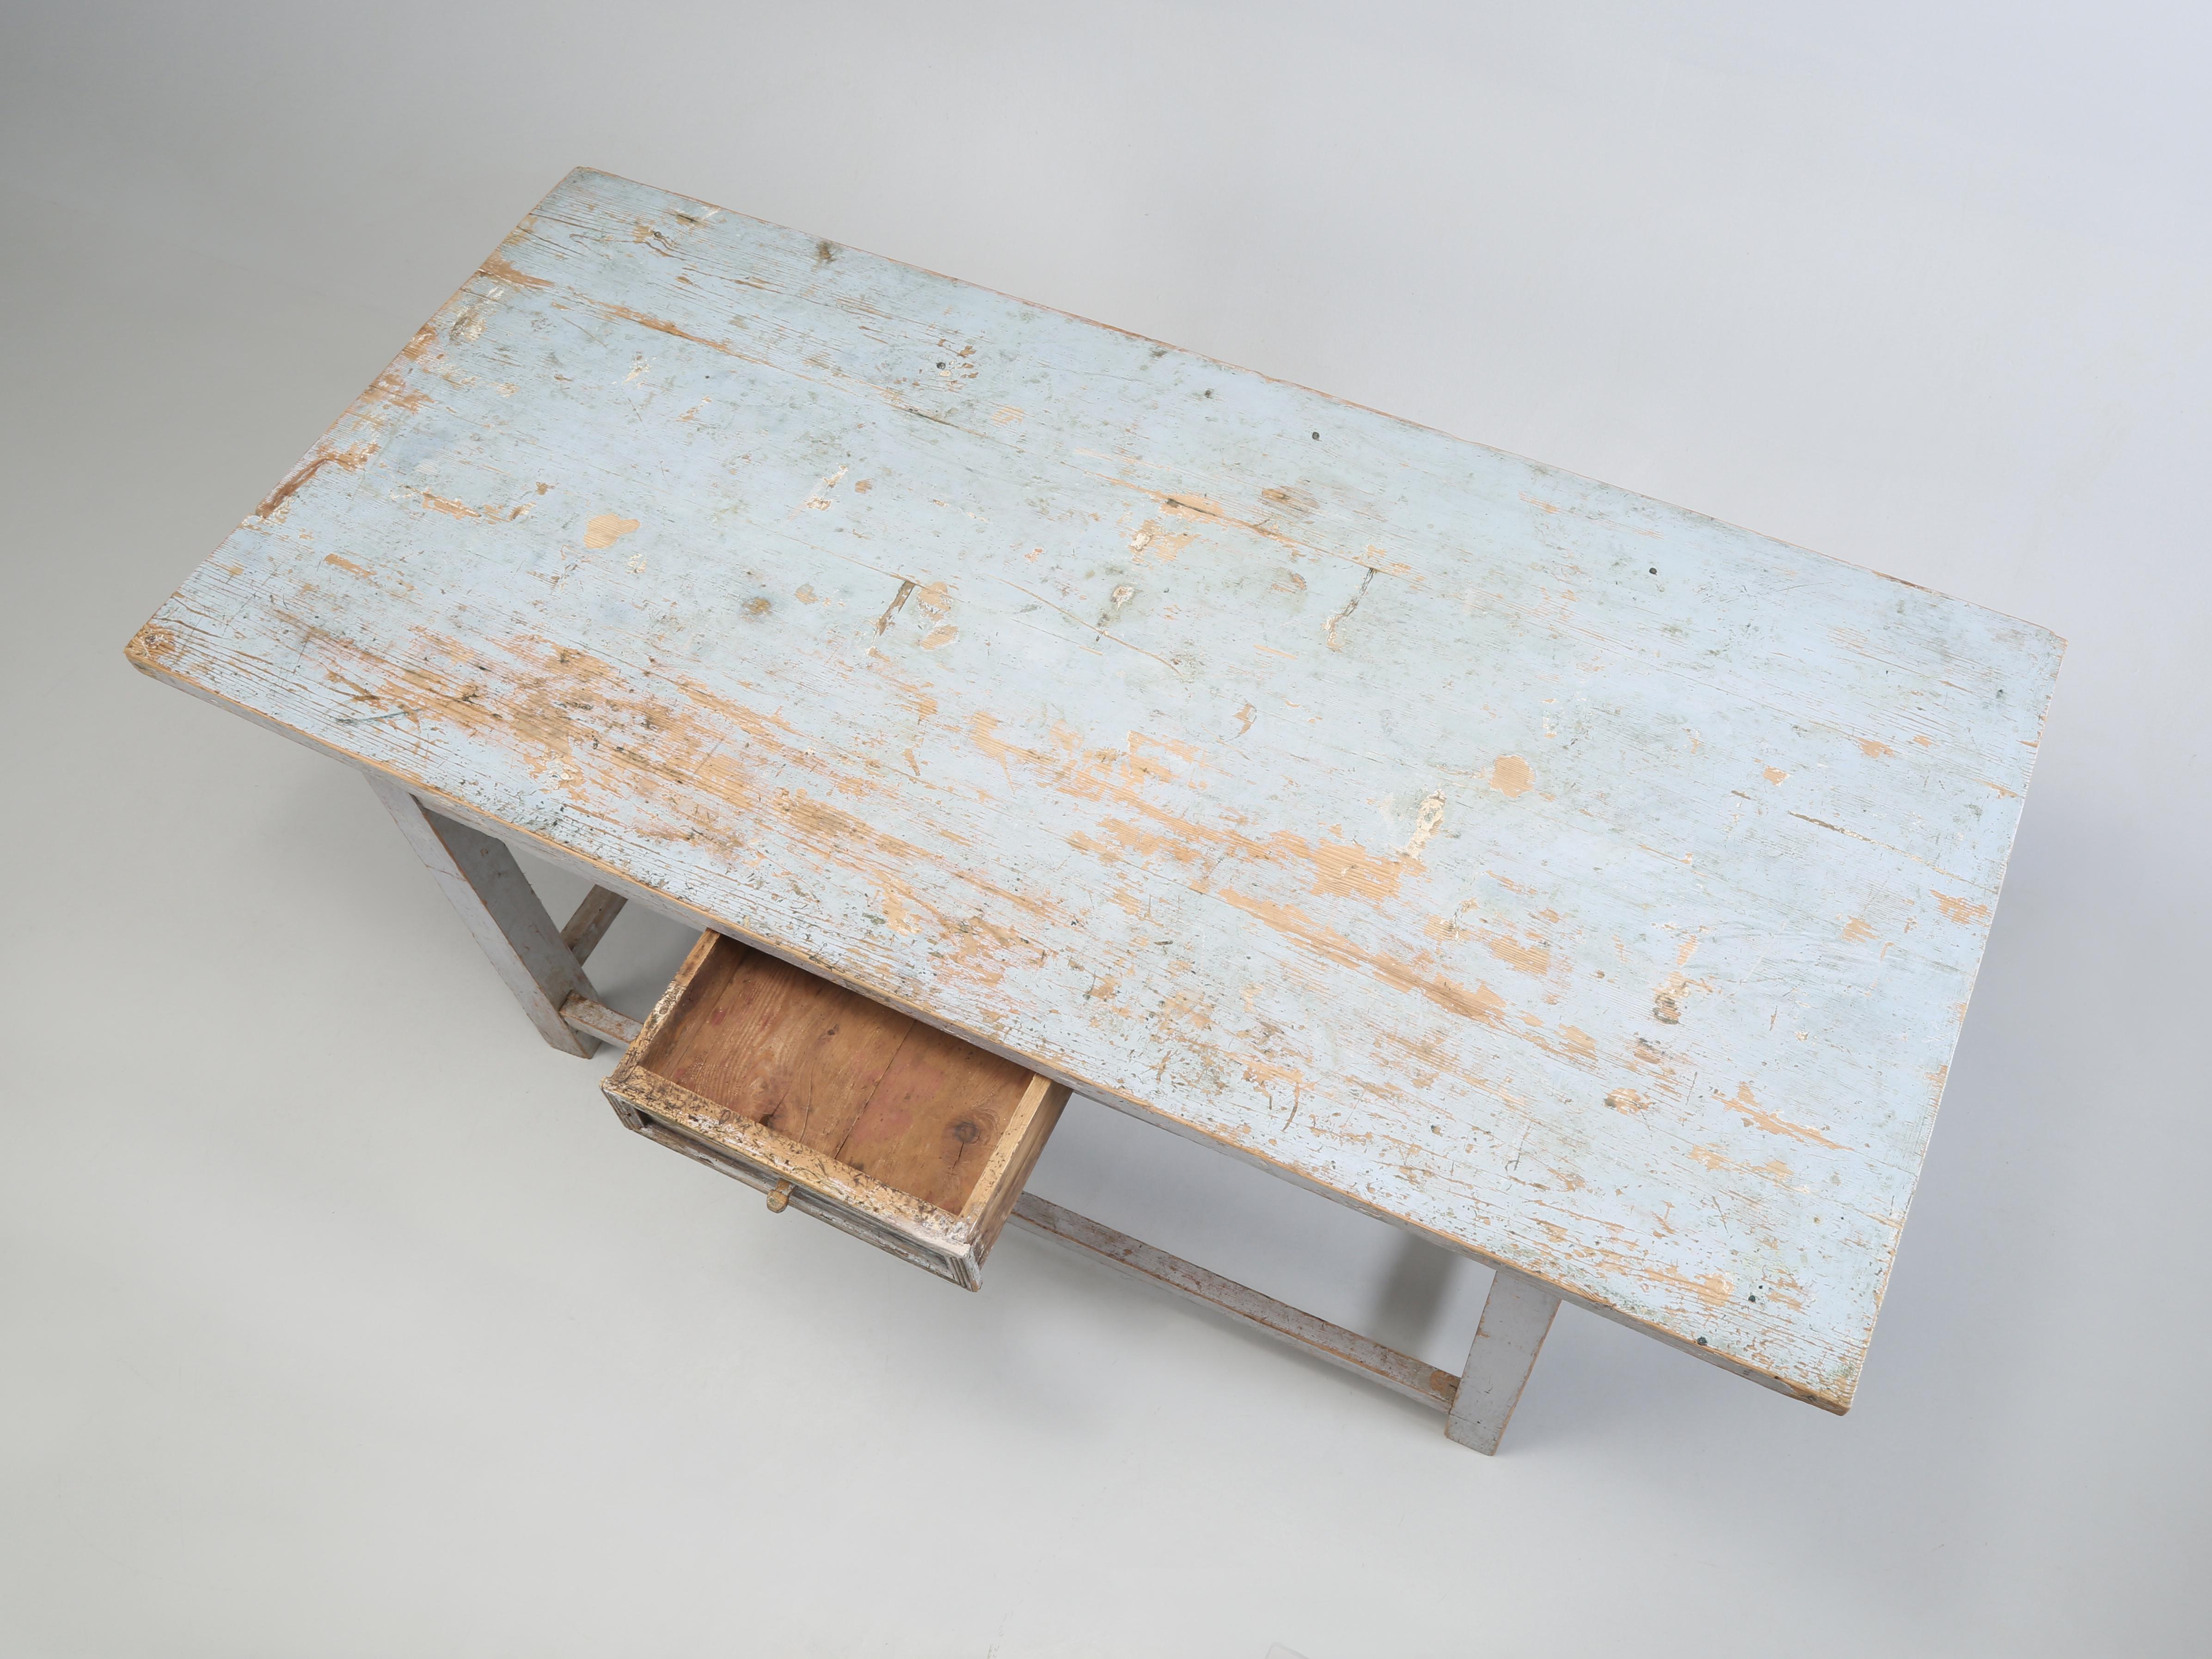 Antique Swedish Painted Table that would make for a Great Looking Kitchen Island, Work Table, or Crafts Table. Finding an Old Painted Industrial Work Table, that would make a unique Kitchen Island is one of the hardest finds in our business today